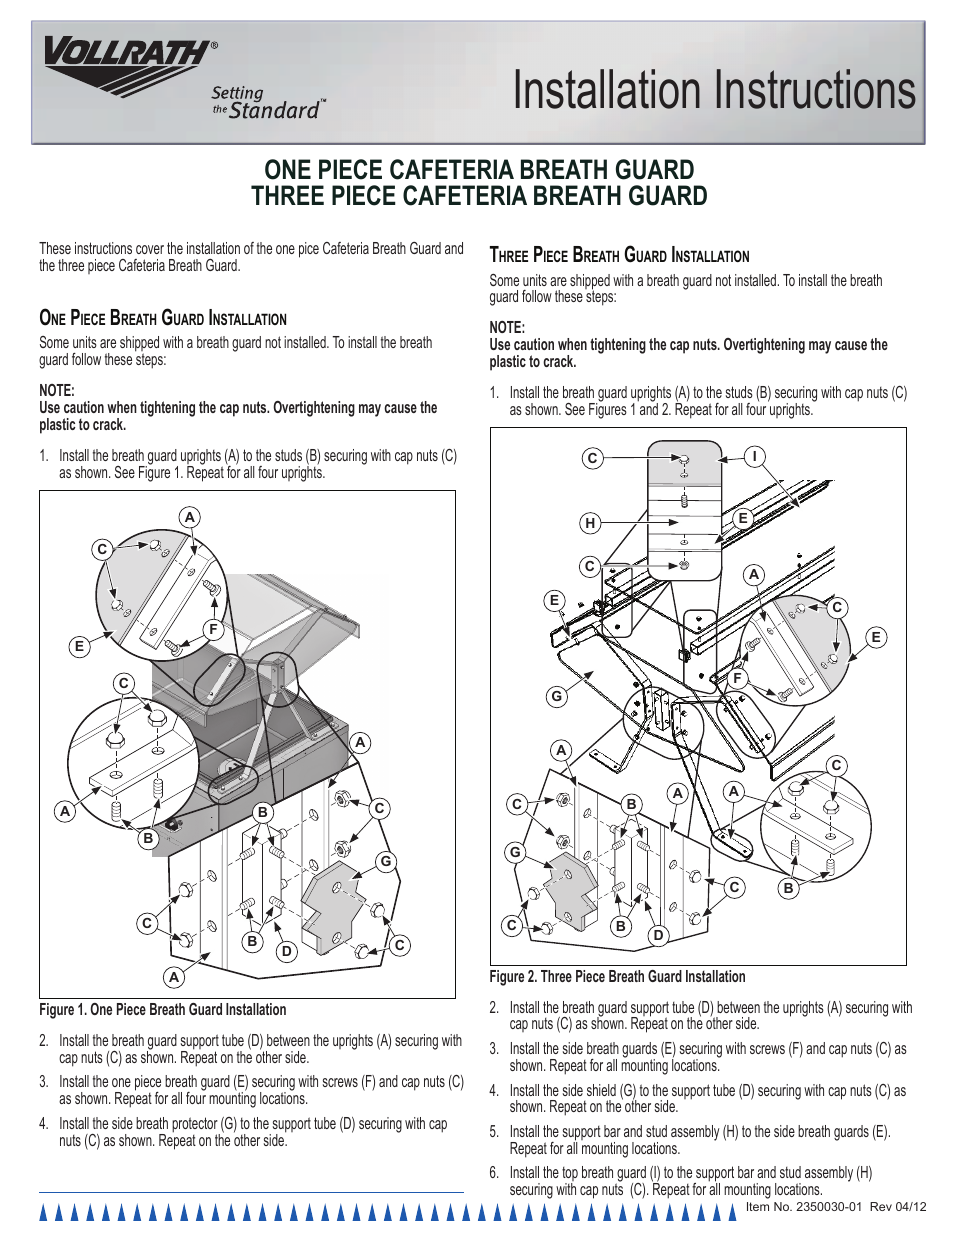 Affordable Portable Hot Food Station Installation Instructions